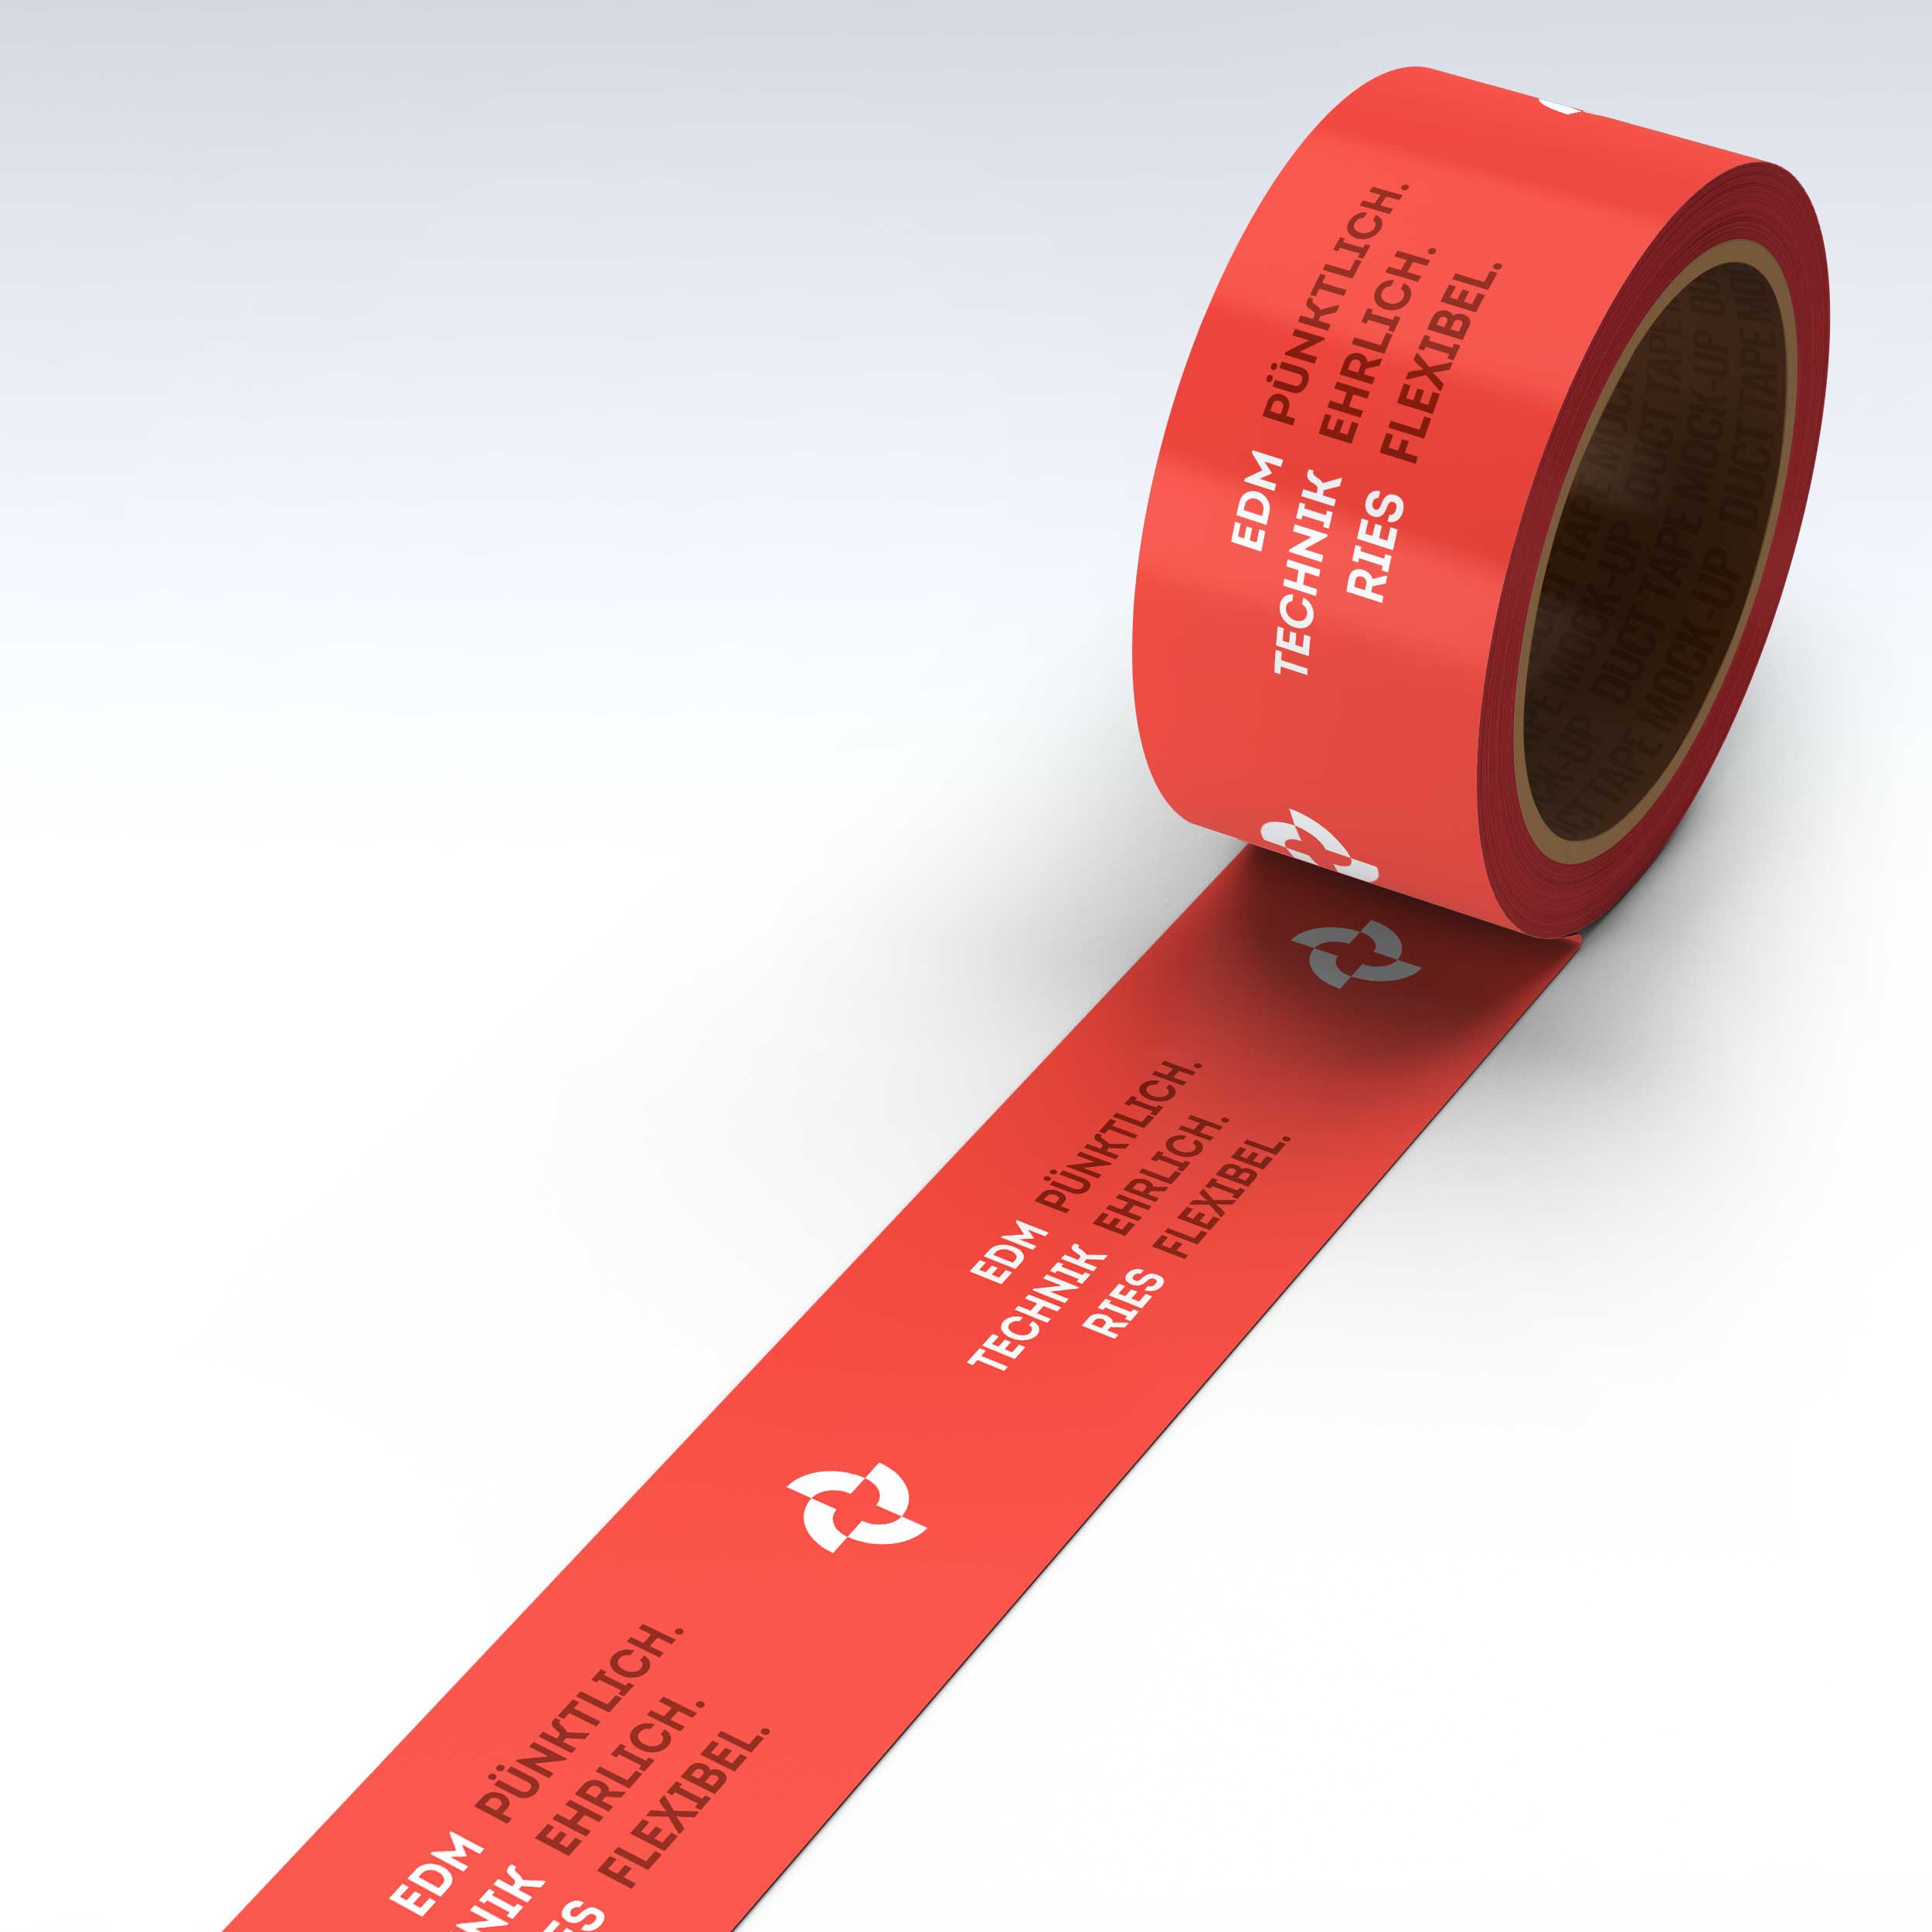 08-Duct-Tape-Sellotape-Mock-Up-1